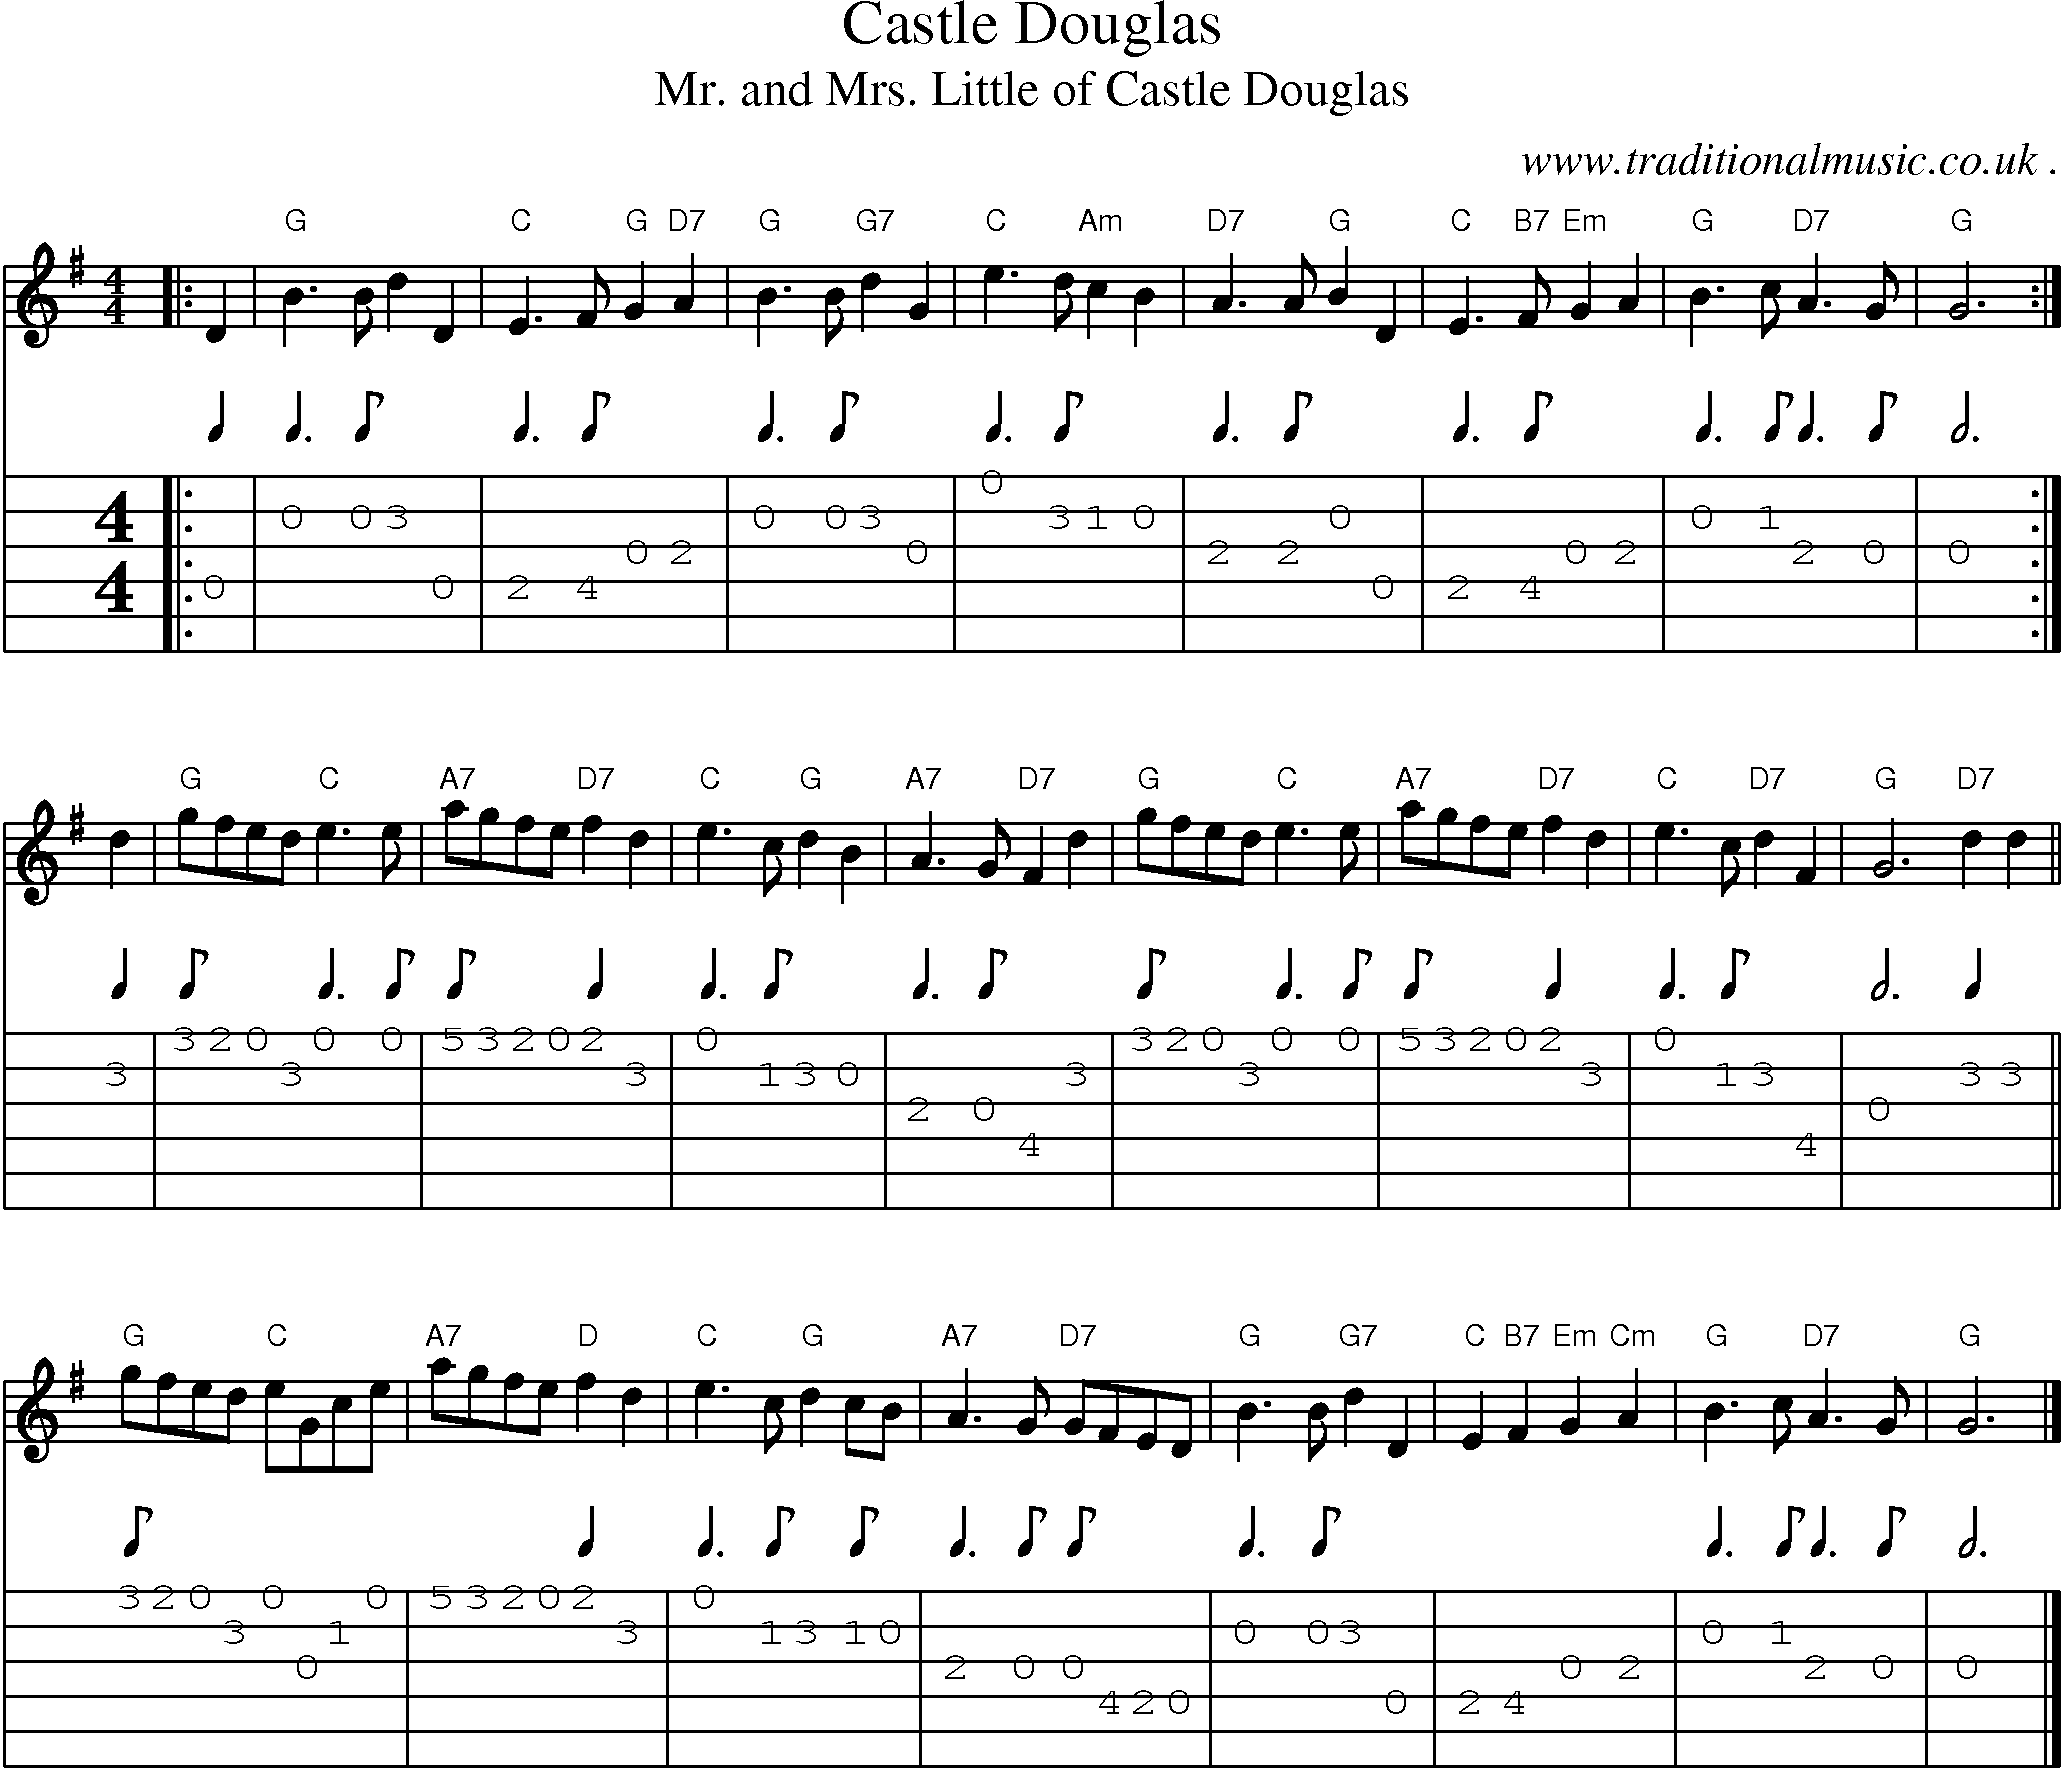 Sheet-music  score, Chords and Guitar Tabs for Castle Douglas